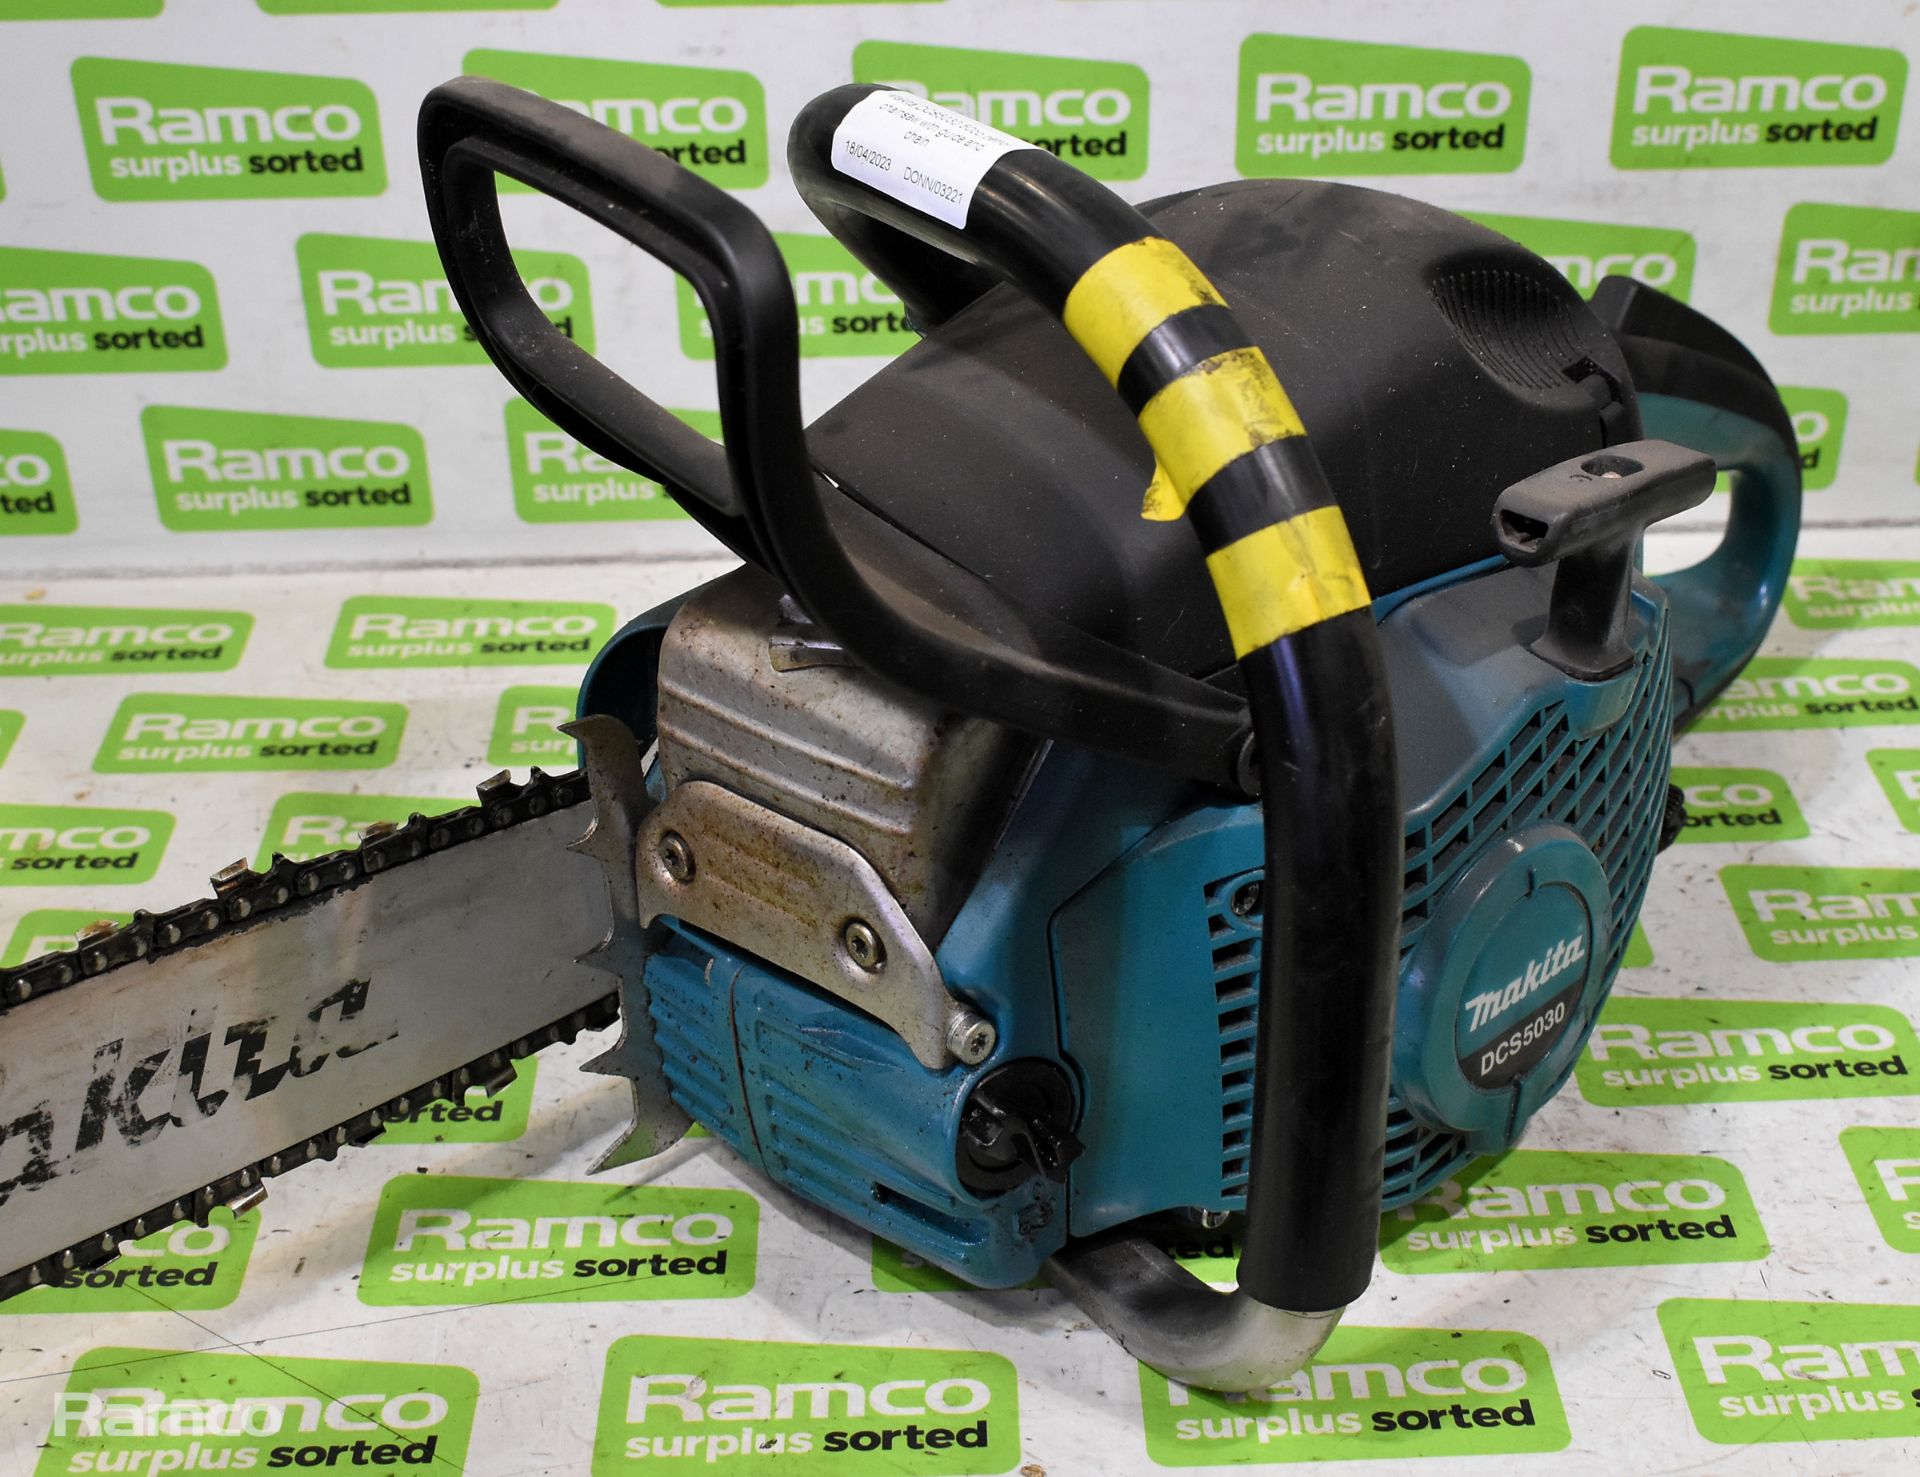 Makita DCS5030 50cc petrol chainsaw with guide and chain - AS SPARES & REPAIRS - Image 3 of 6